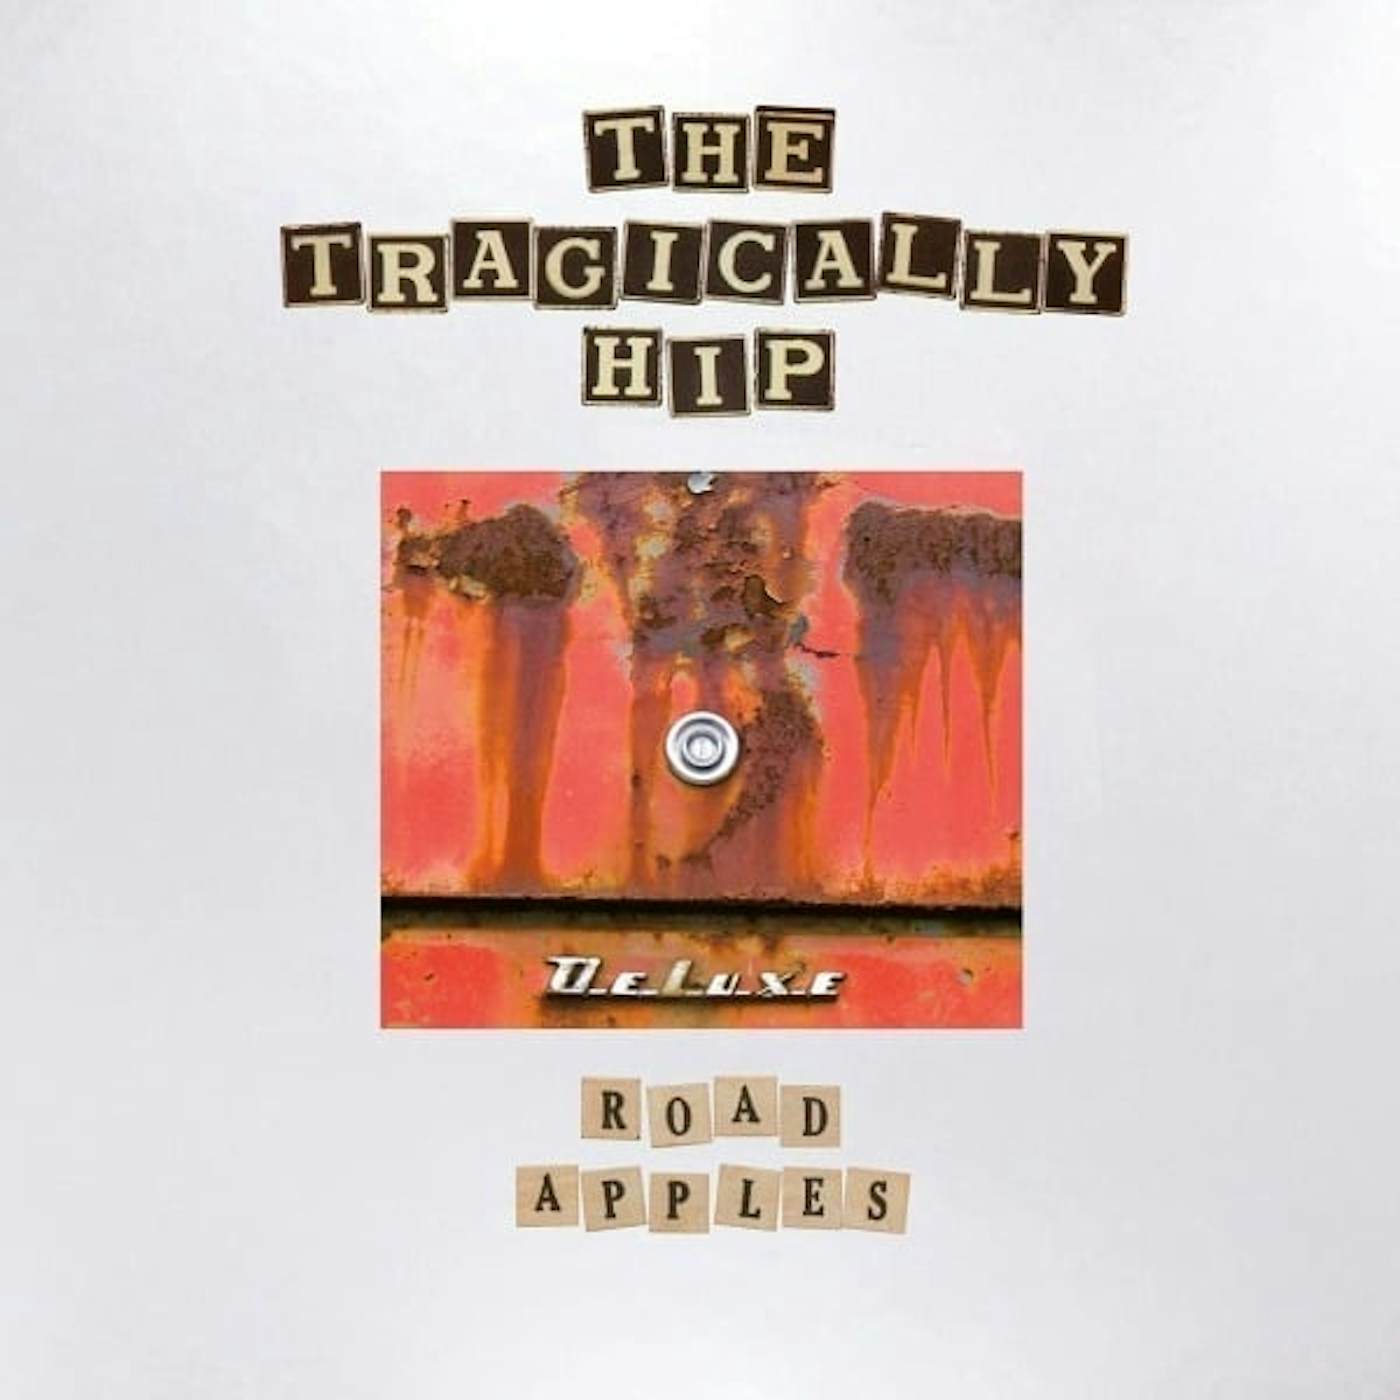 The Tragically Hip ROAD APPLES (30TH ANNIVERSARY) Vinyl Record